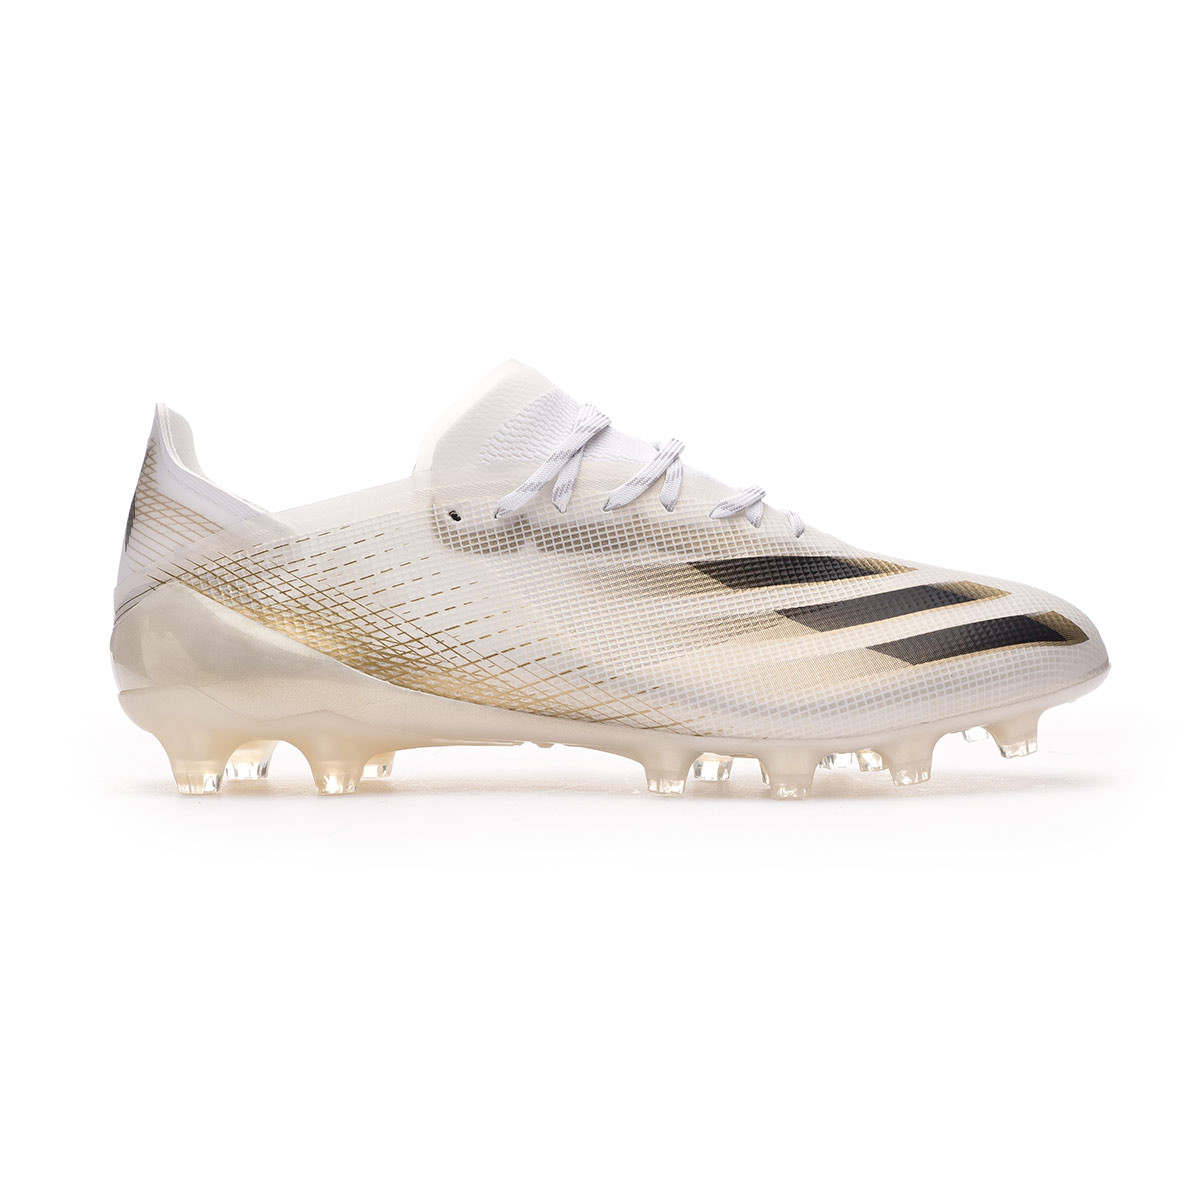 Football Boots adidas X Ghosted .1 AG White-Black-Metallic Gold 